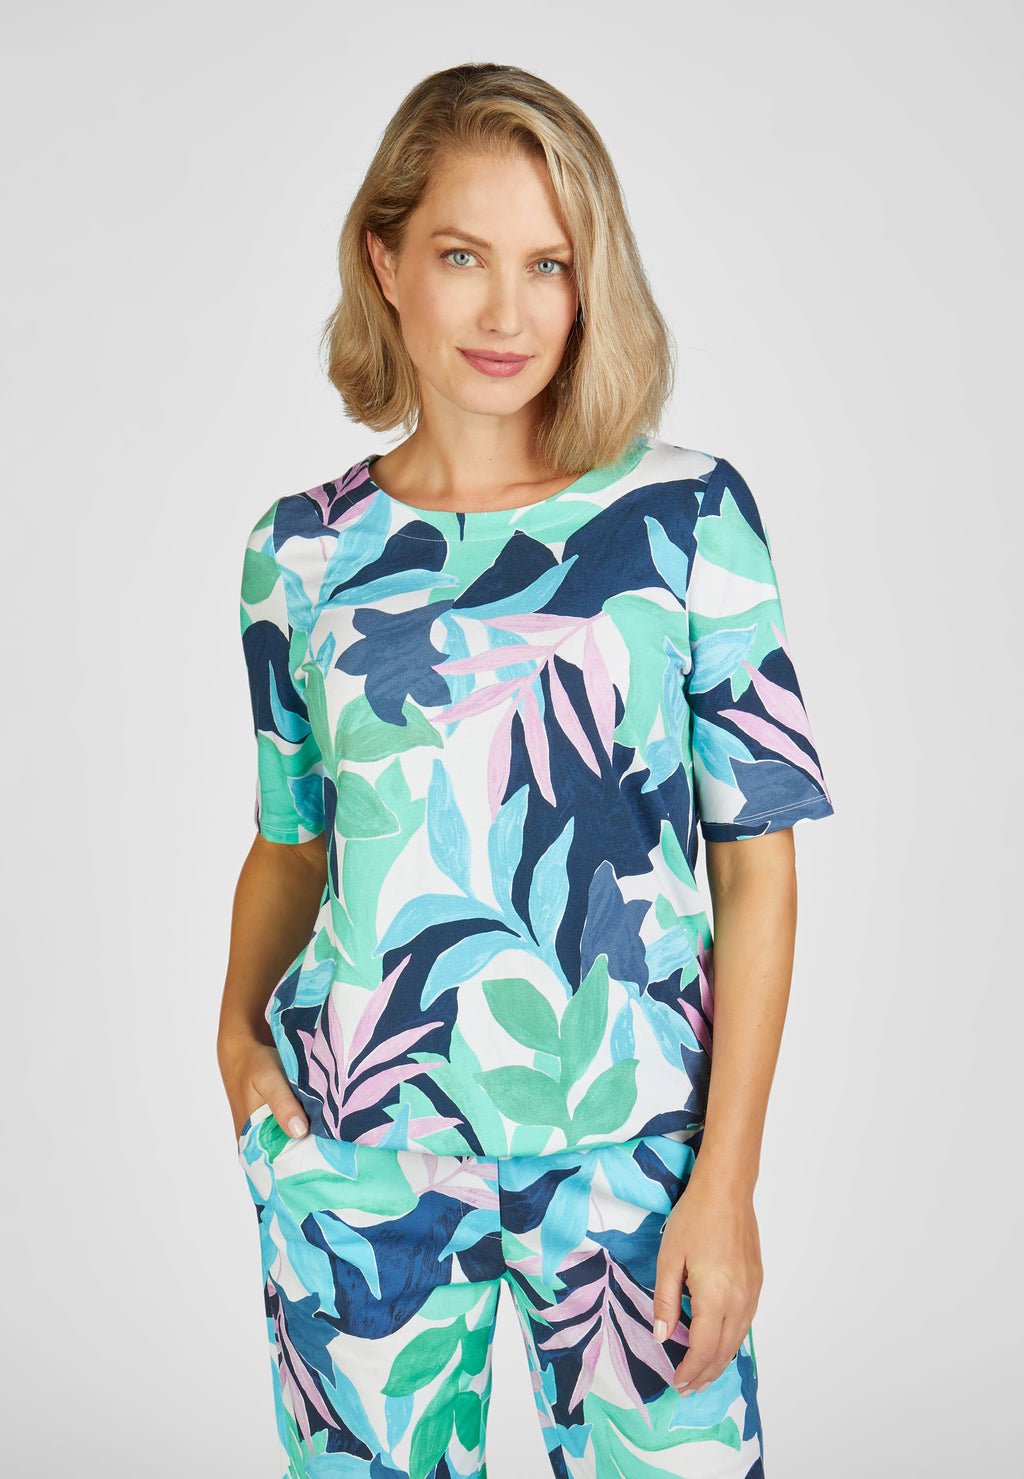 Rabe salty breeze collection leaf print roundneck tshirt, product code 52-223350